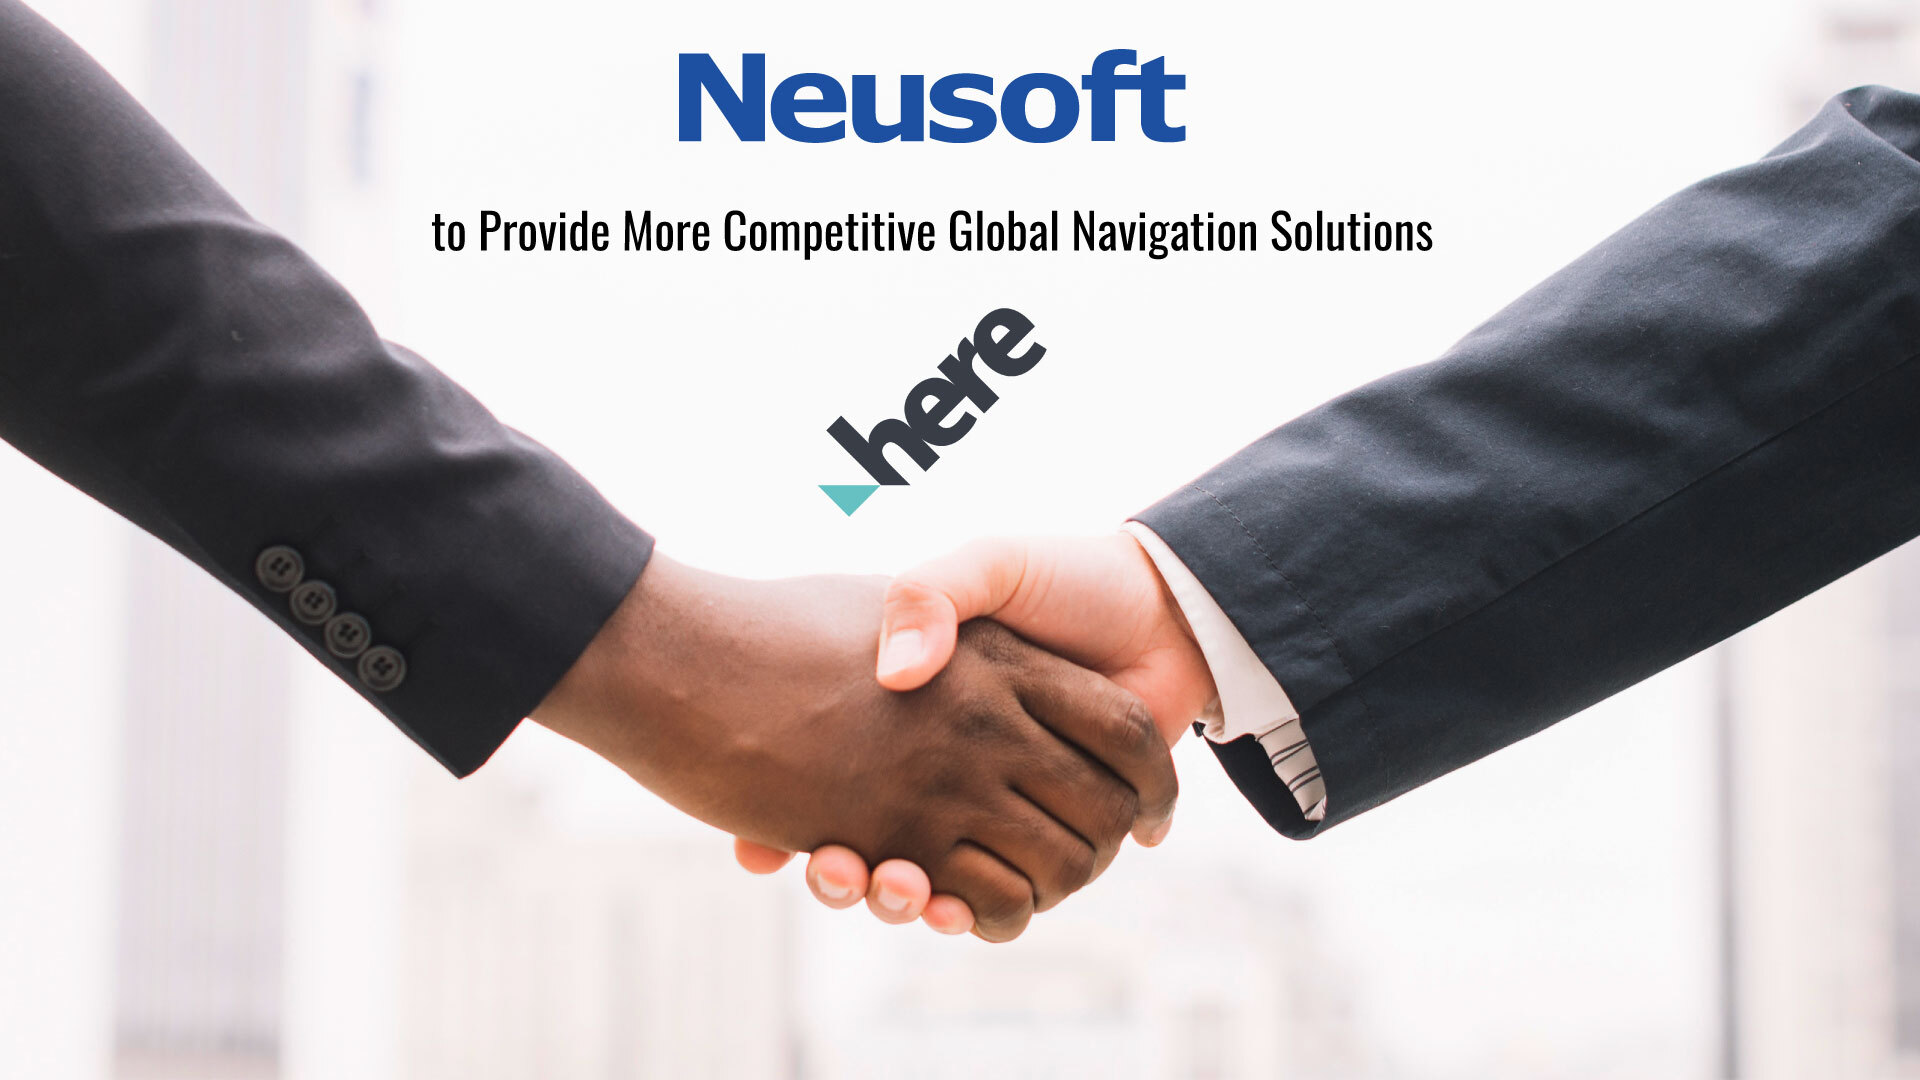 Neusoft and HERE Join Hands to Provide More Competitive Global Navigation Solutions